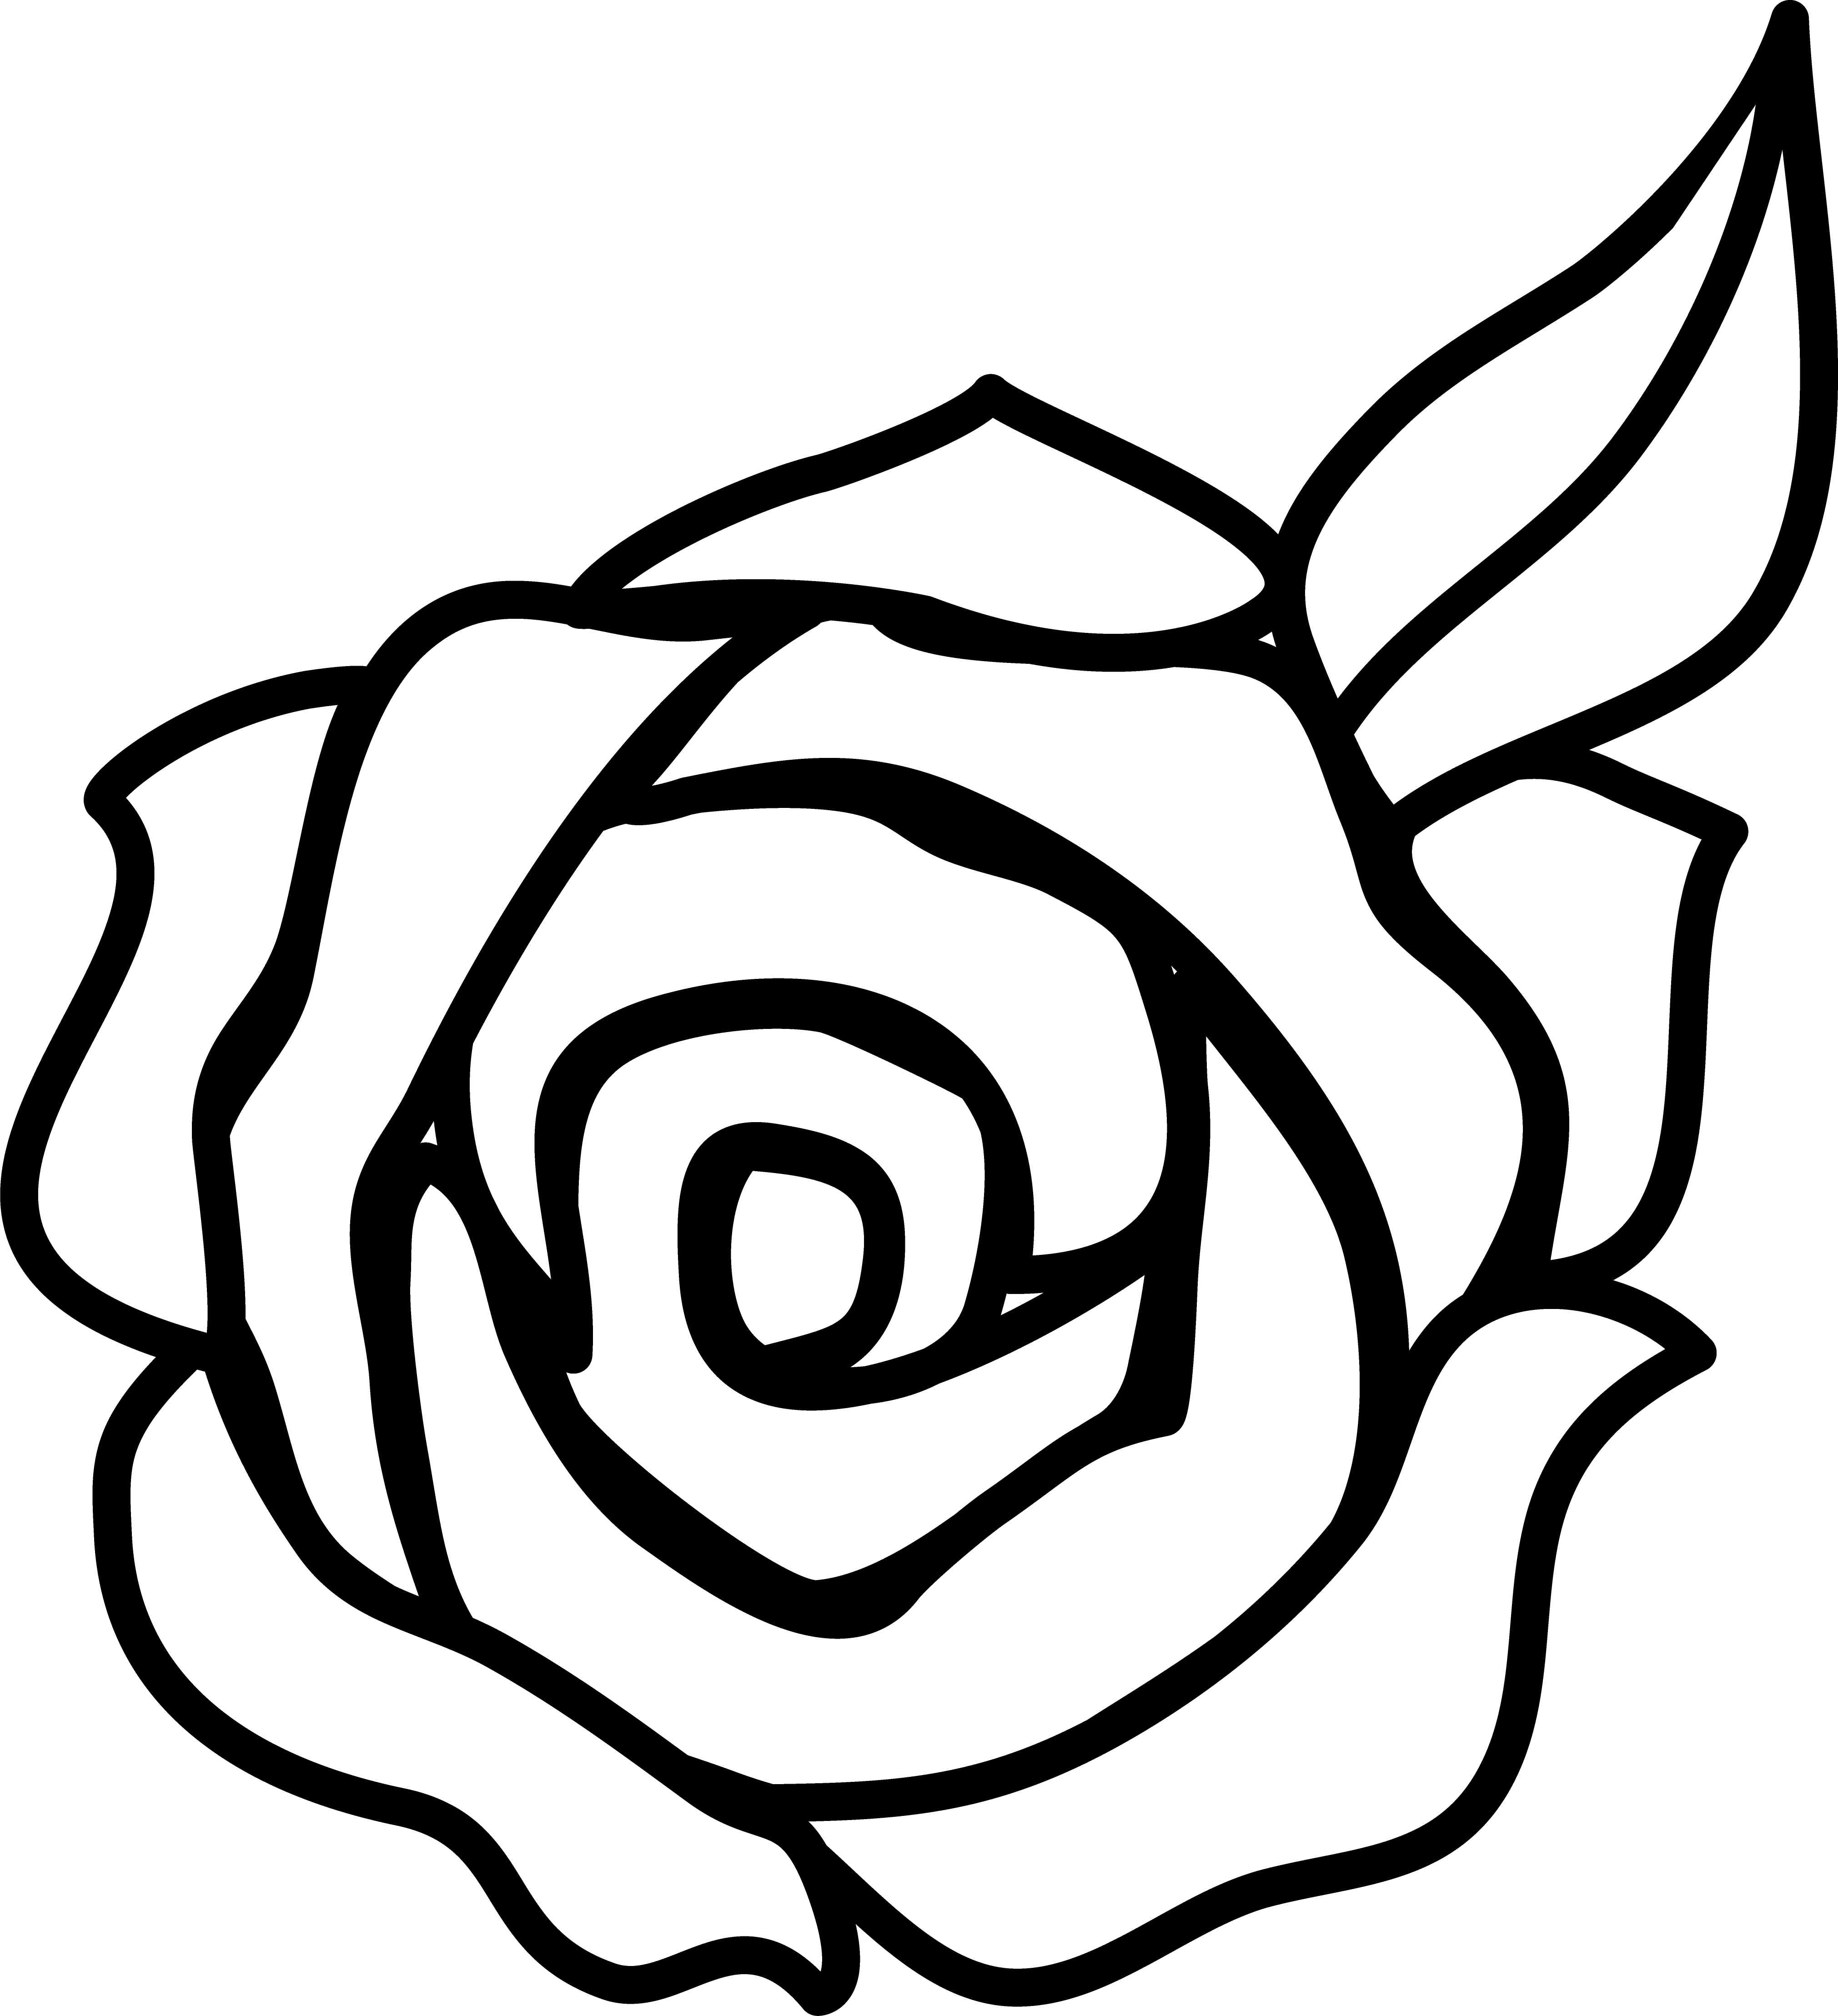 A White Rose With Leaves